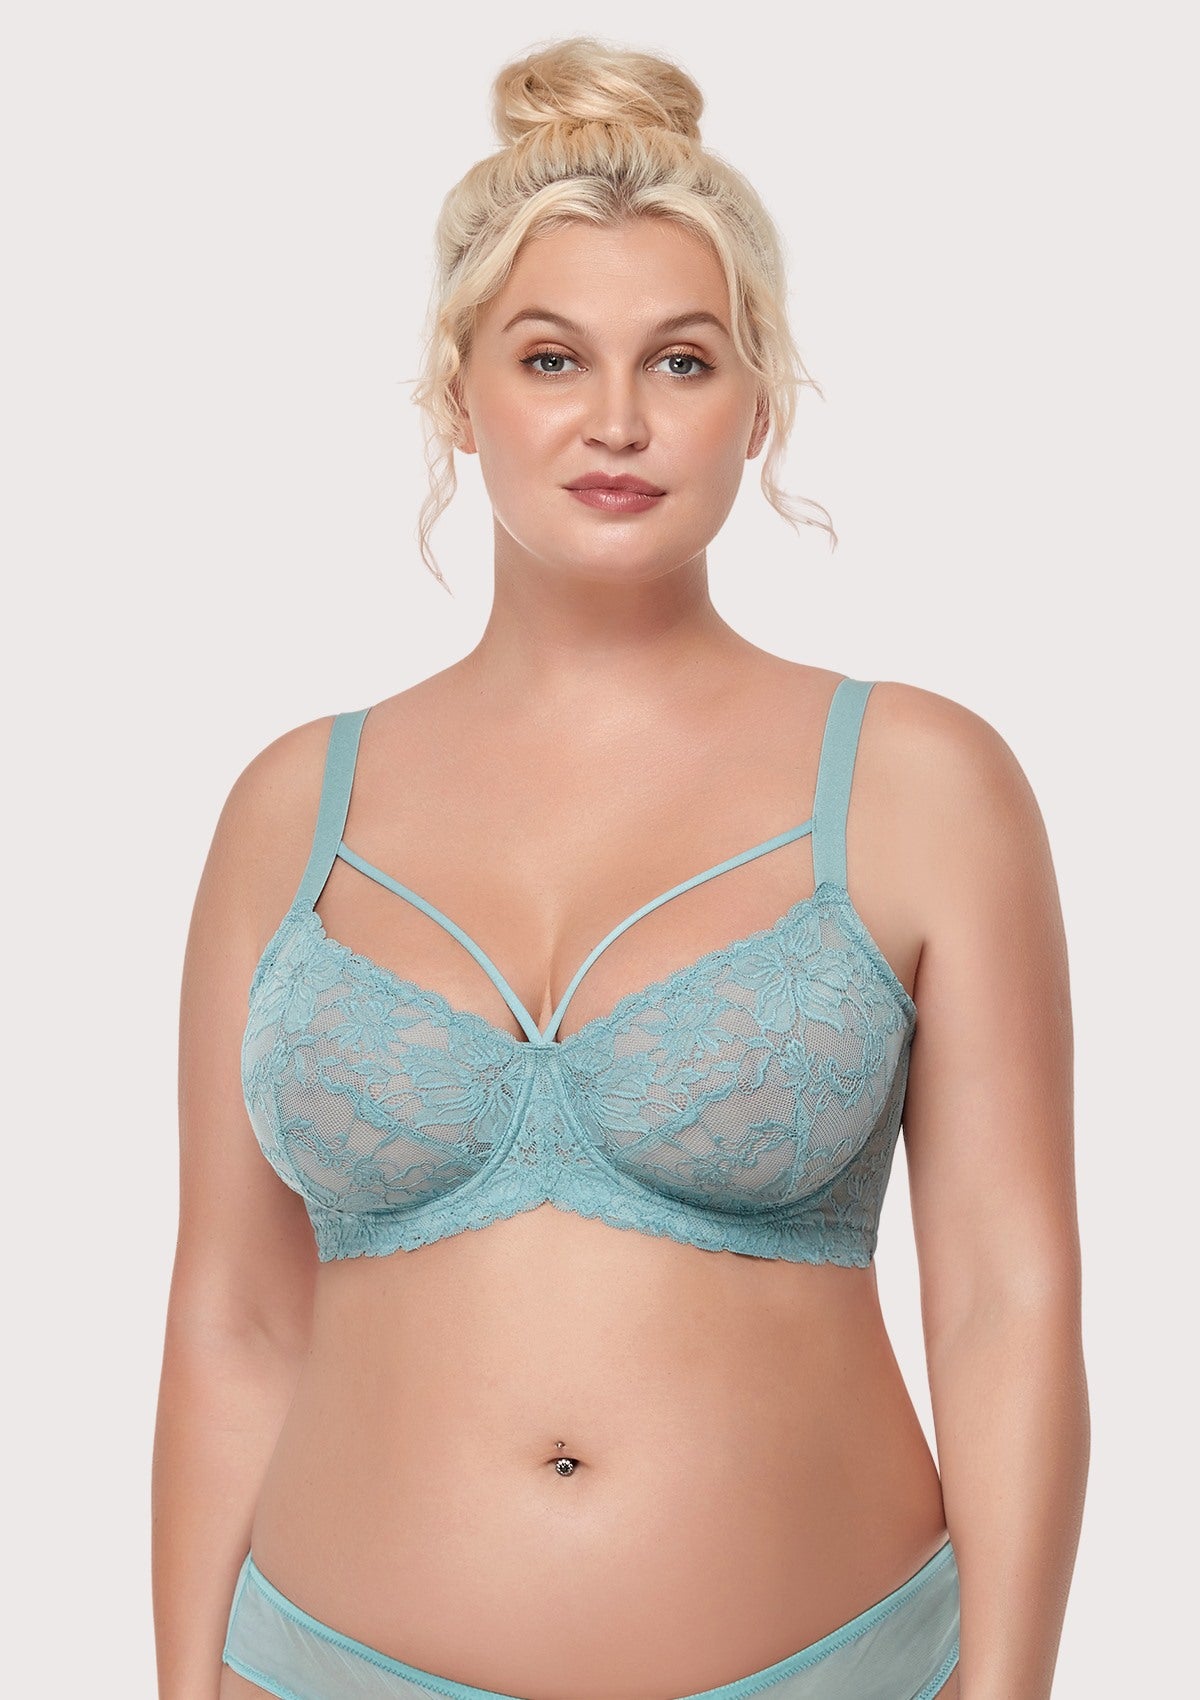 HSIA Pretty In Petals Unlined Lace Bra: Comfortable And Supportive Bra - Crystal Blue / 38 / D